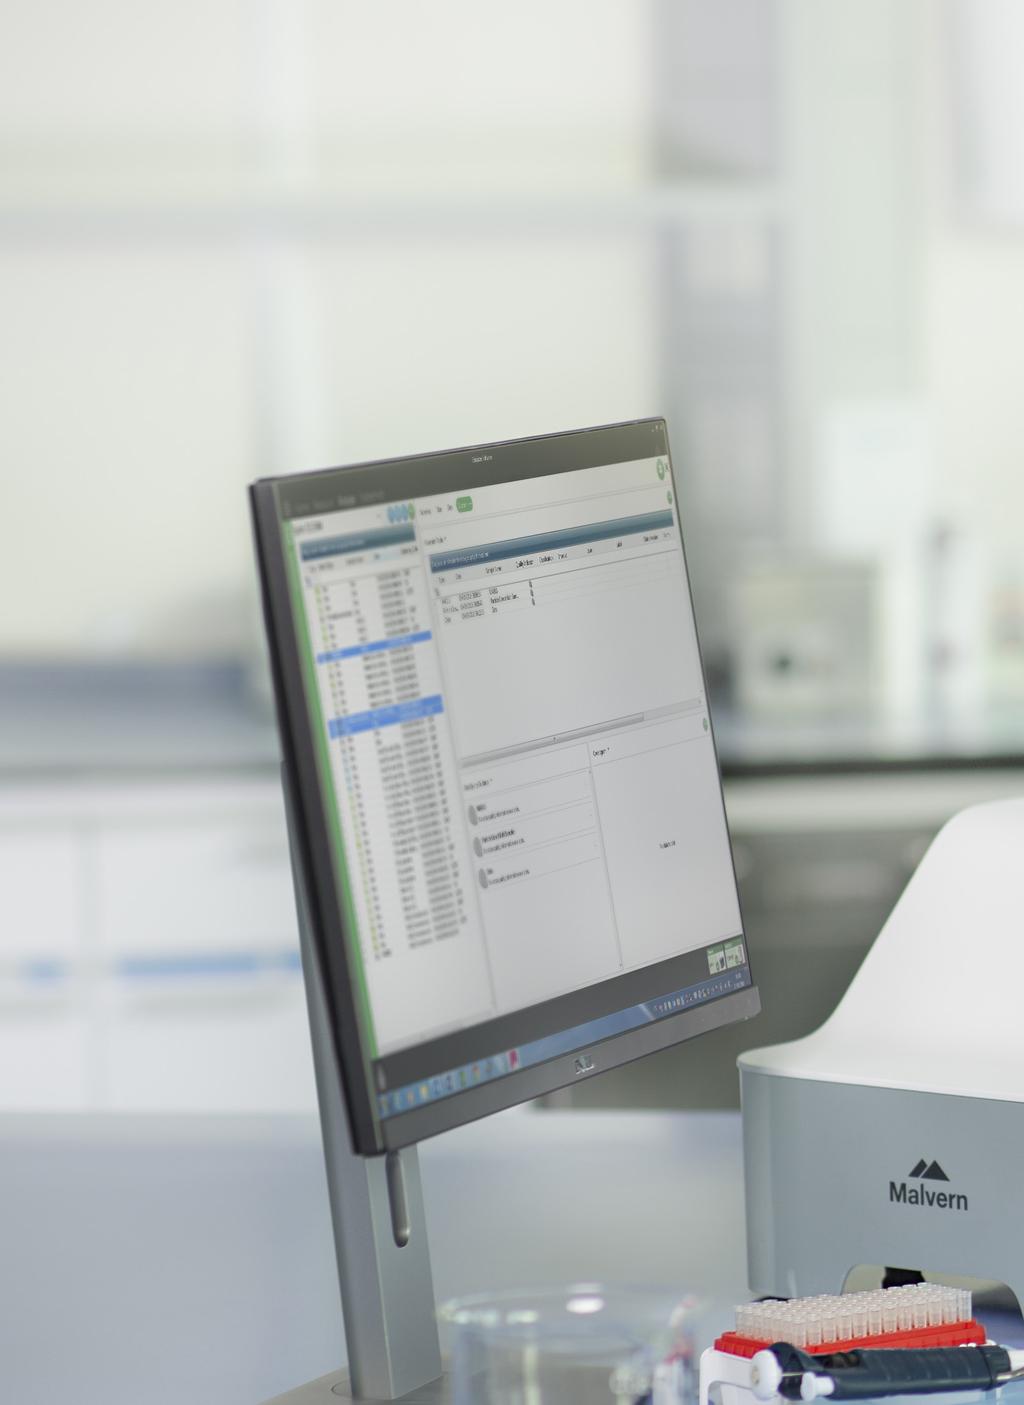 8 ZETASIZER PRO Fast The Zetasizer Pro is a robust and versatile solution for routine laboratory measurements of molecular size, particle size, electrophoretic mobility and zeta potential.